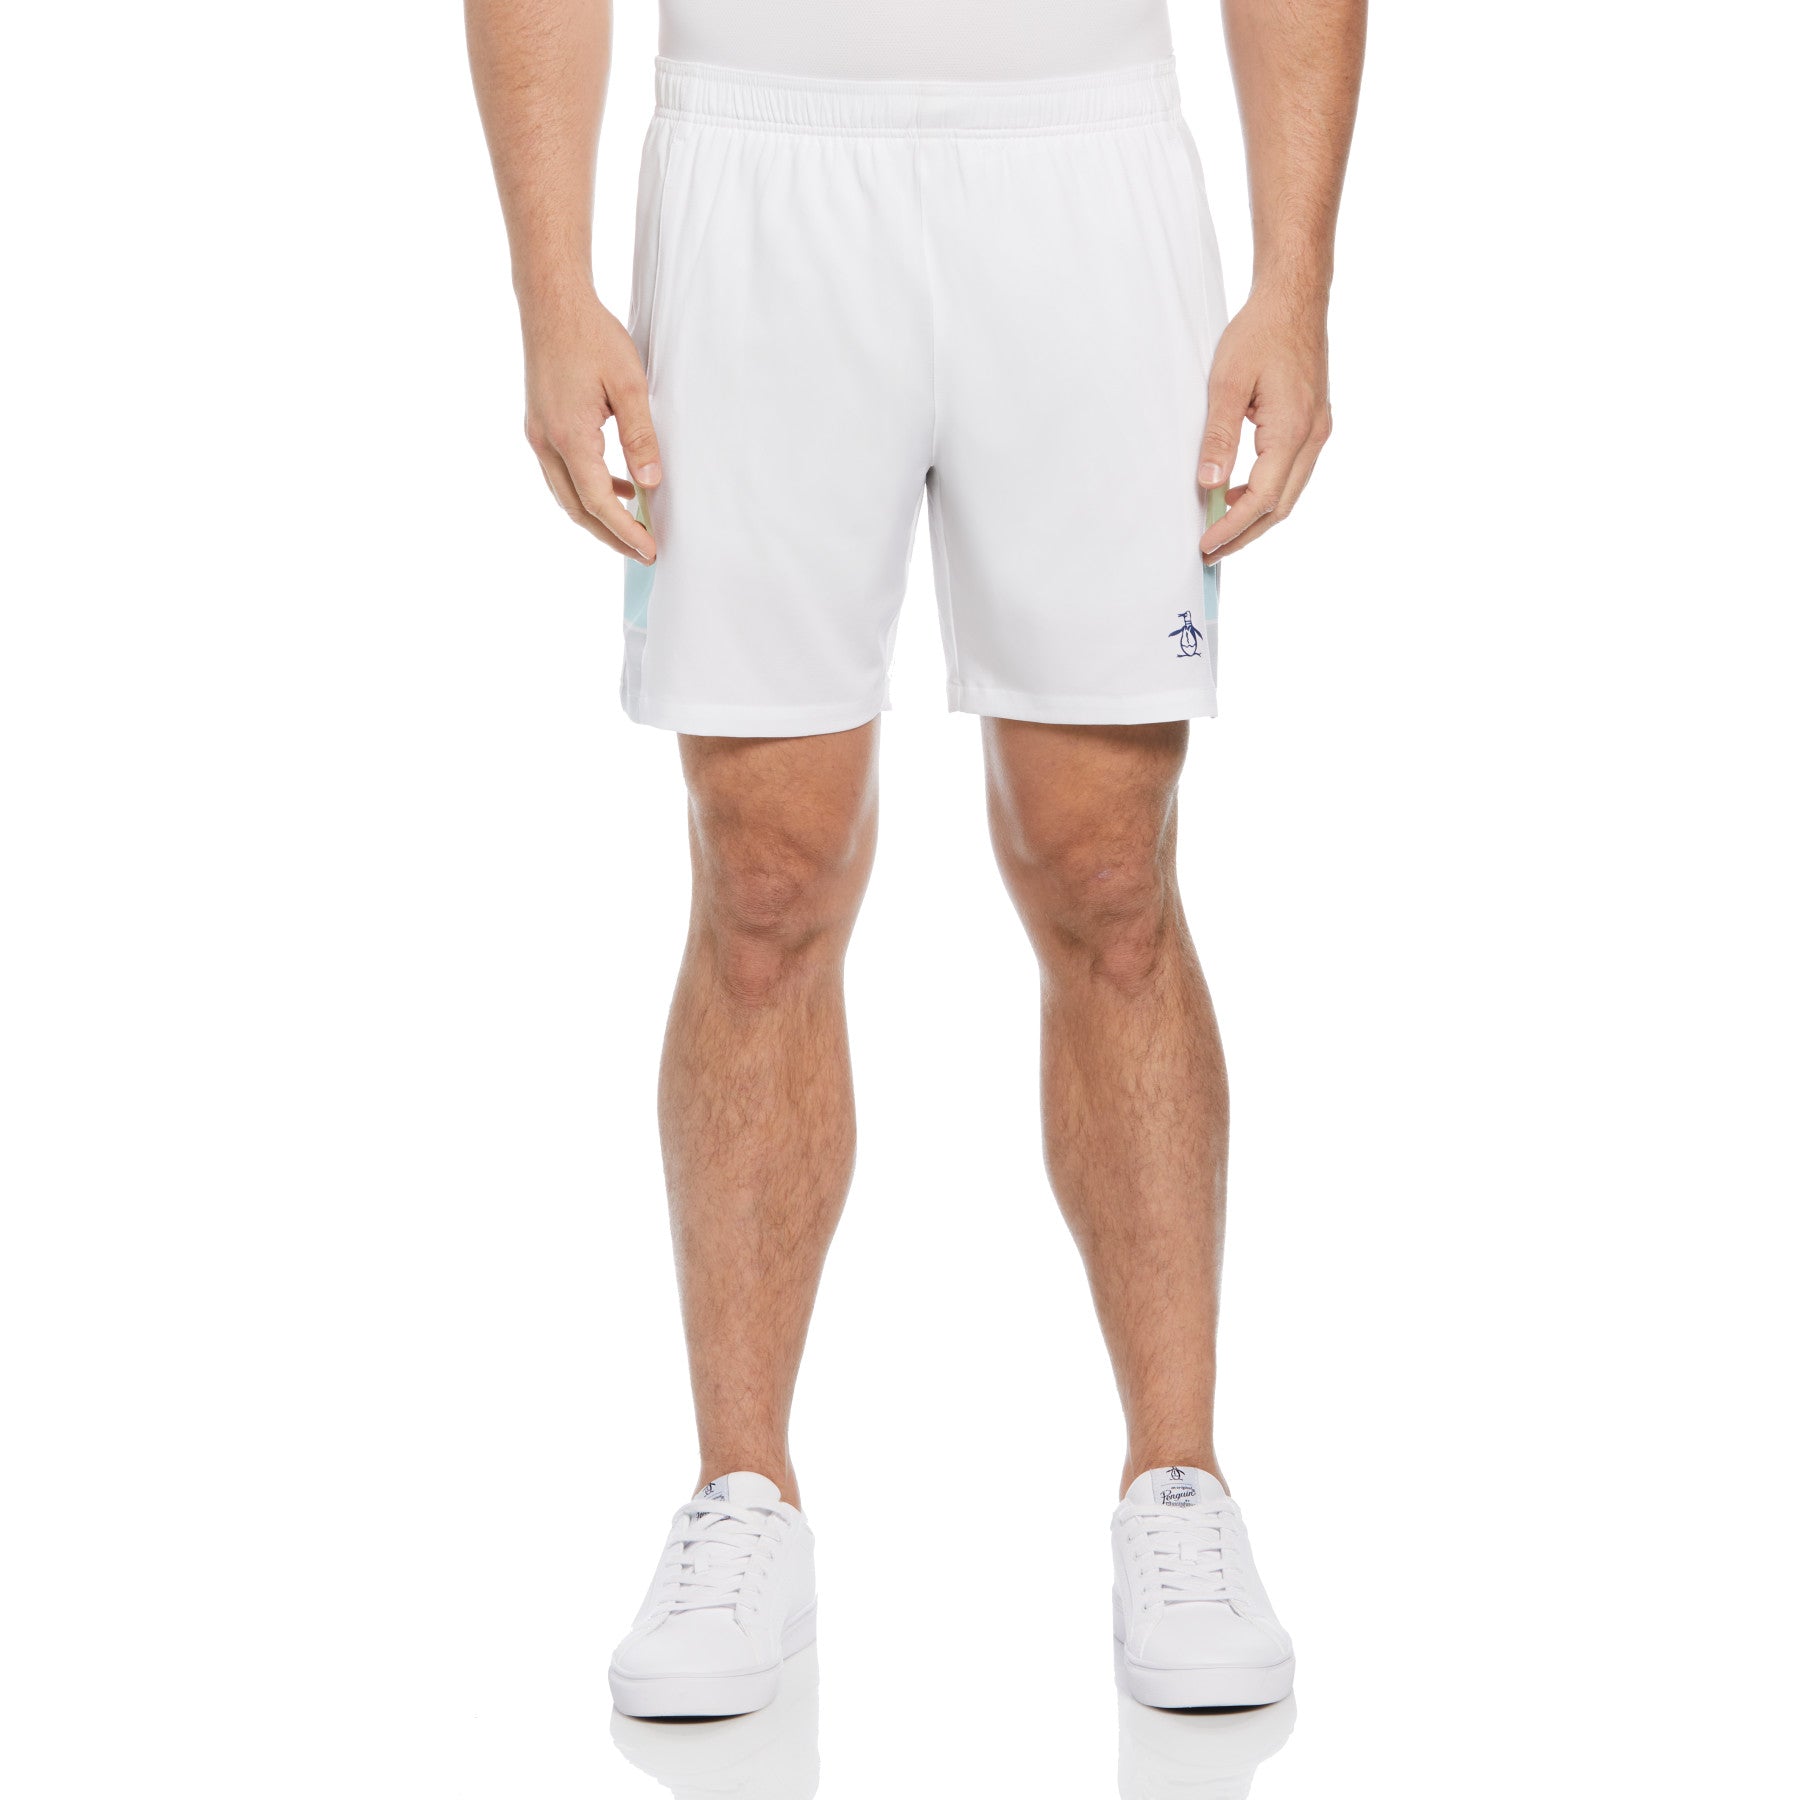 View Color Block Performance Tennis Shorts In Bright White information